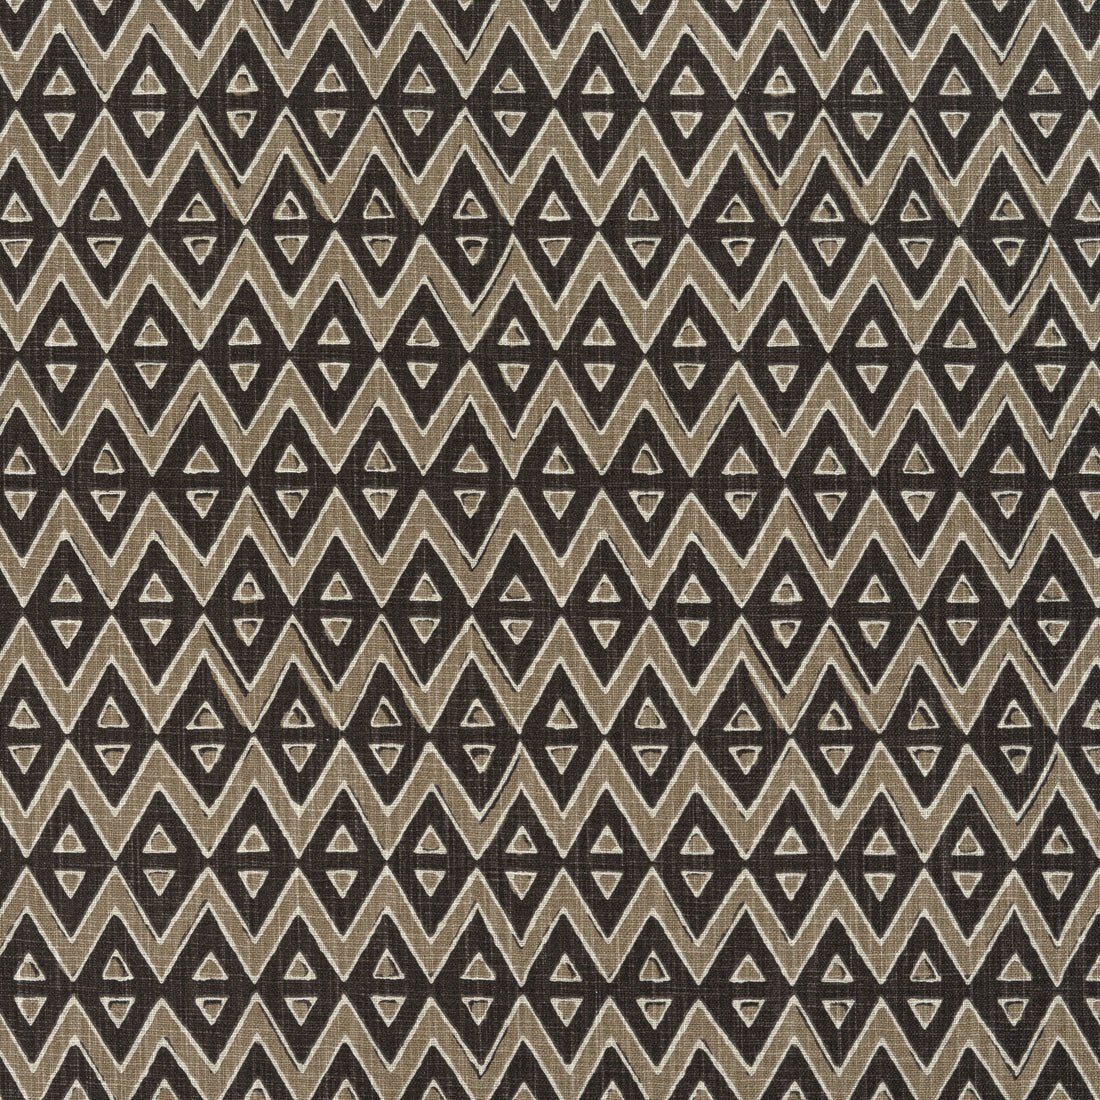 Tiburon fabric in brown color - pattern number F913239 - by Thibaut in the Mesa collection